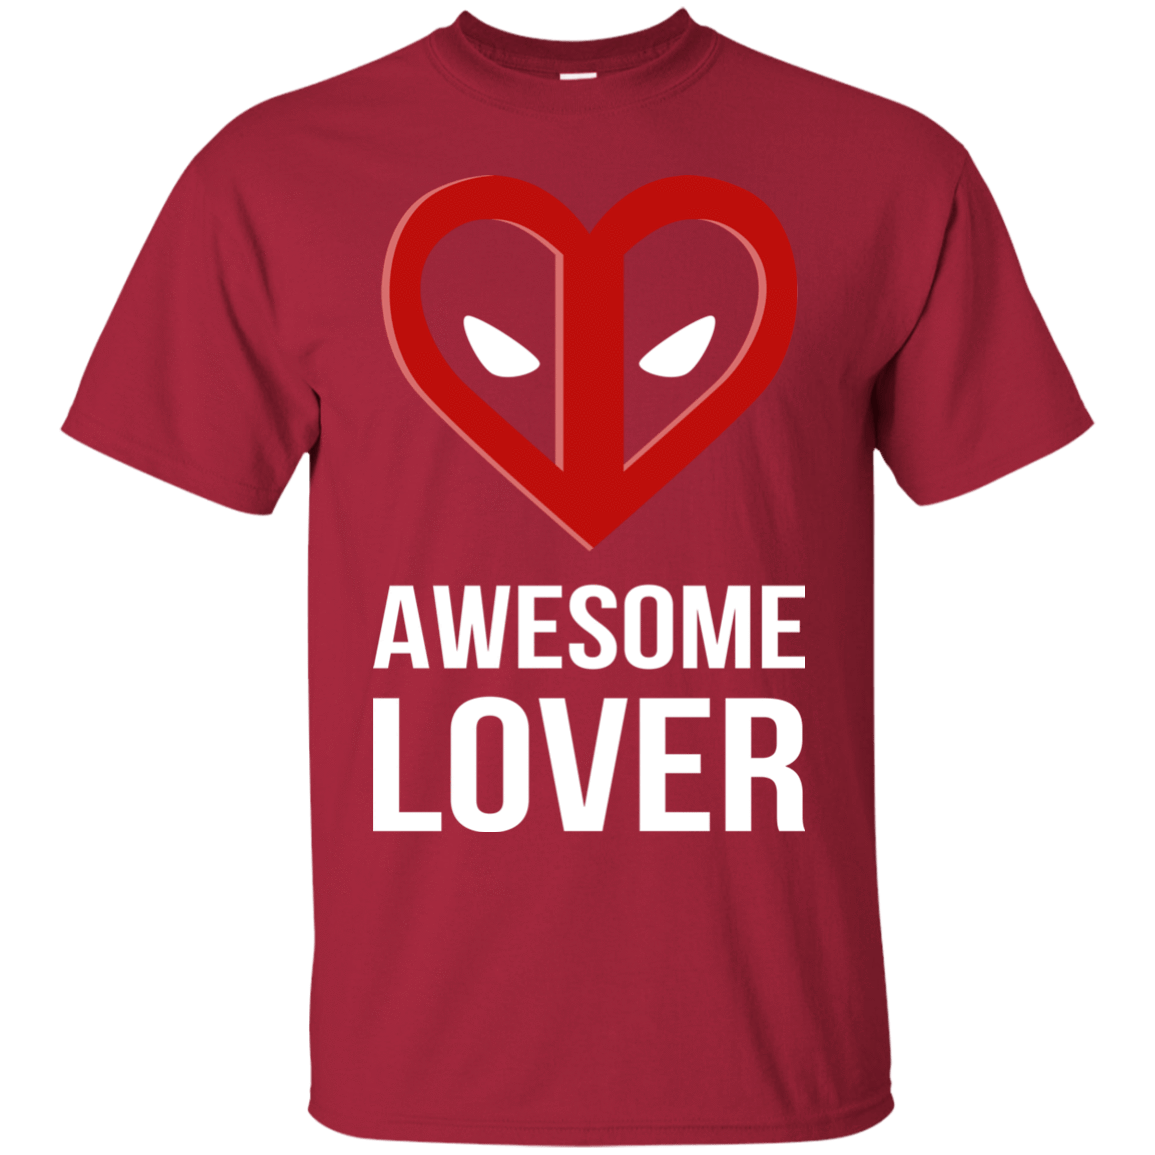 T-Shirts Cardinal / Small Awesome lover T-Shirt